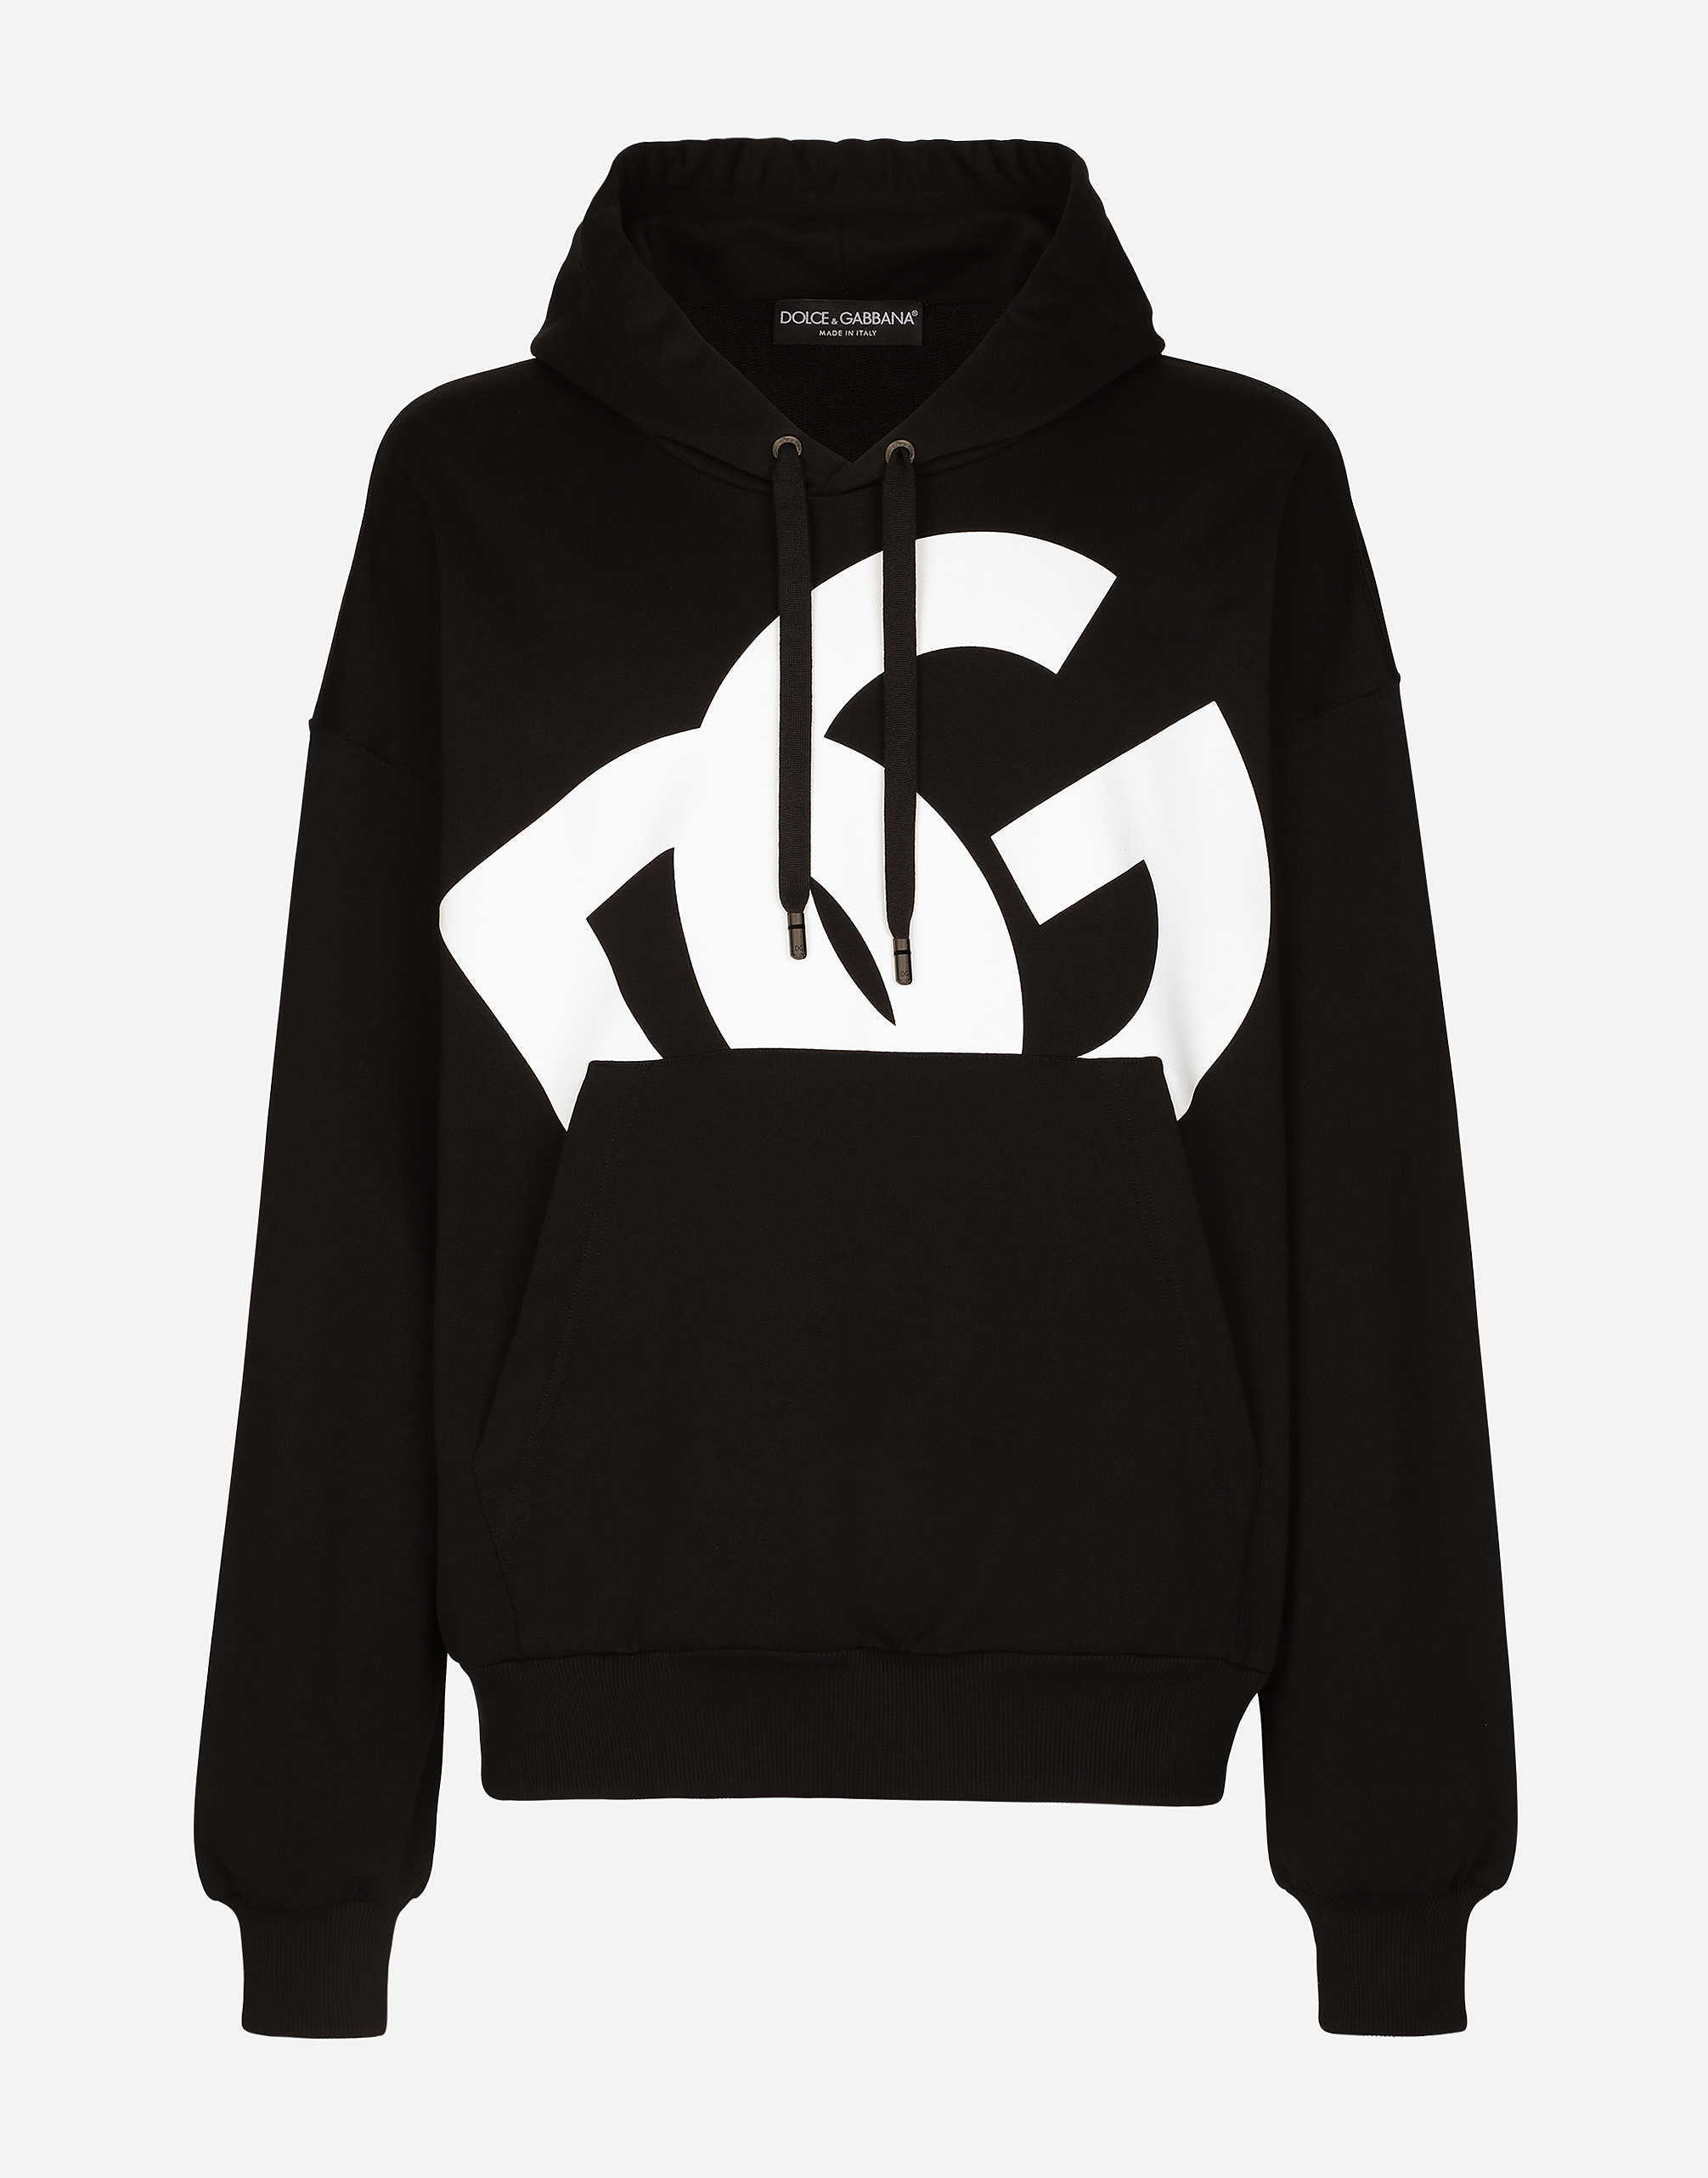 Dolce & Gabbana Jersey Hoodie With Dg Print In Black